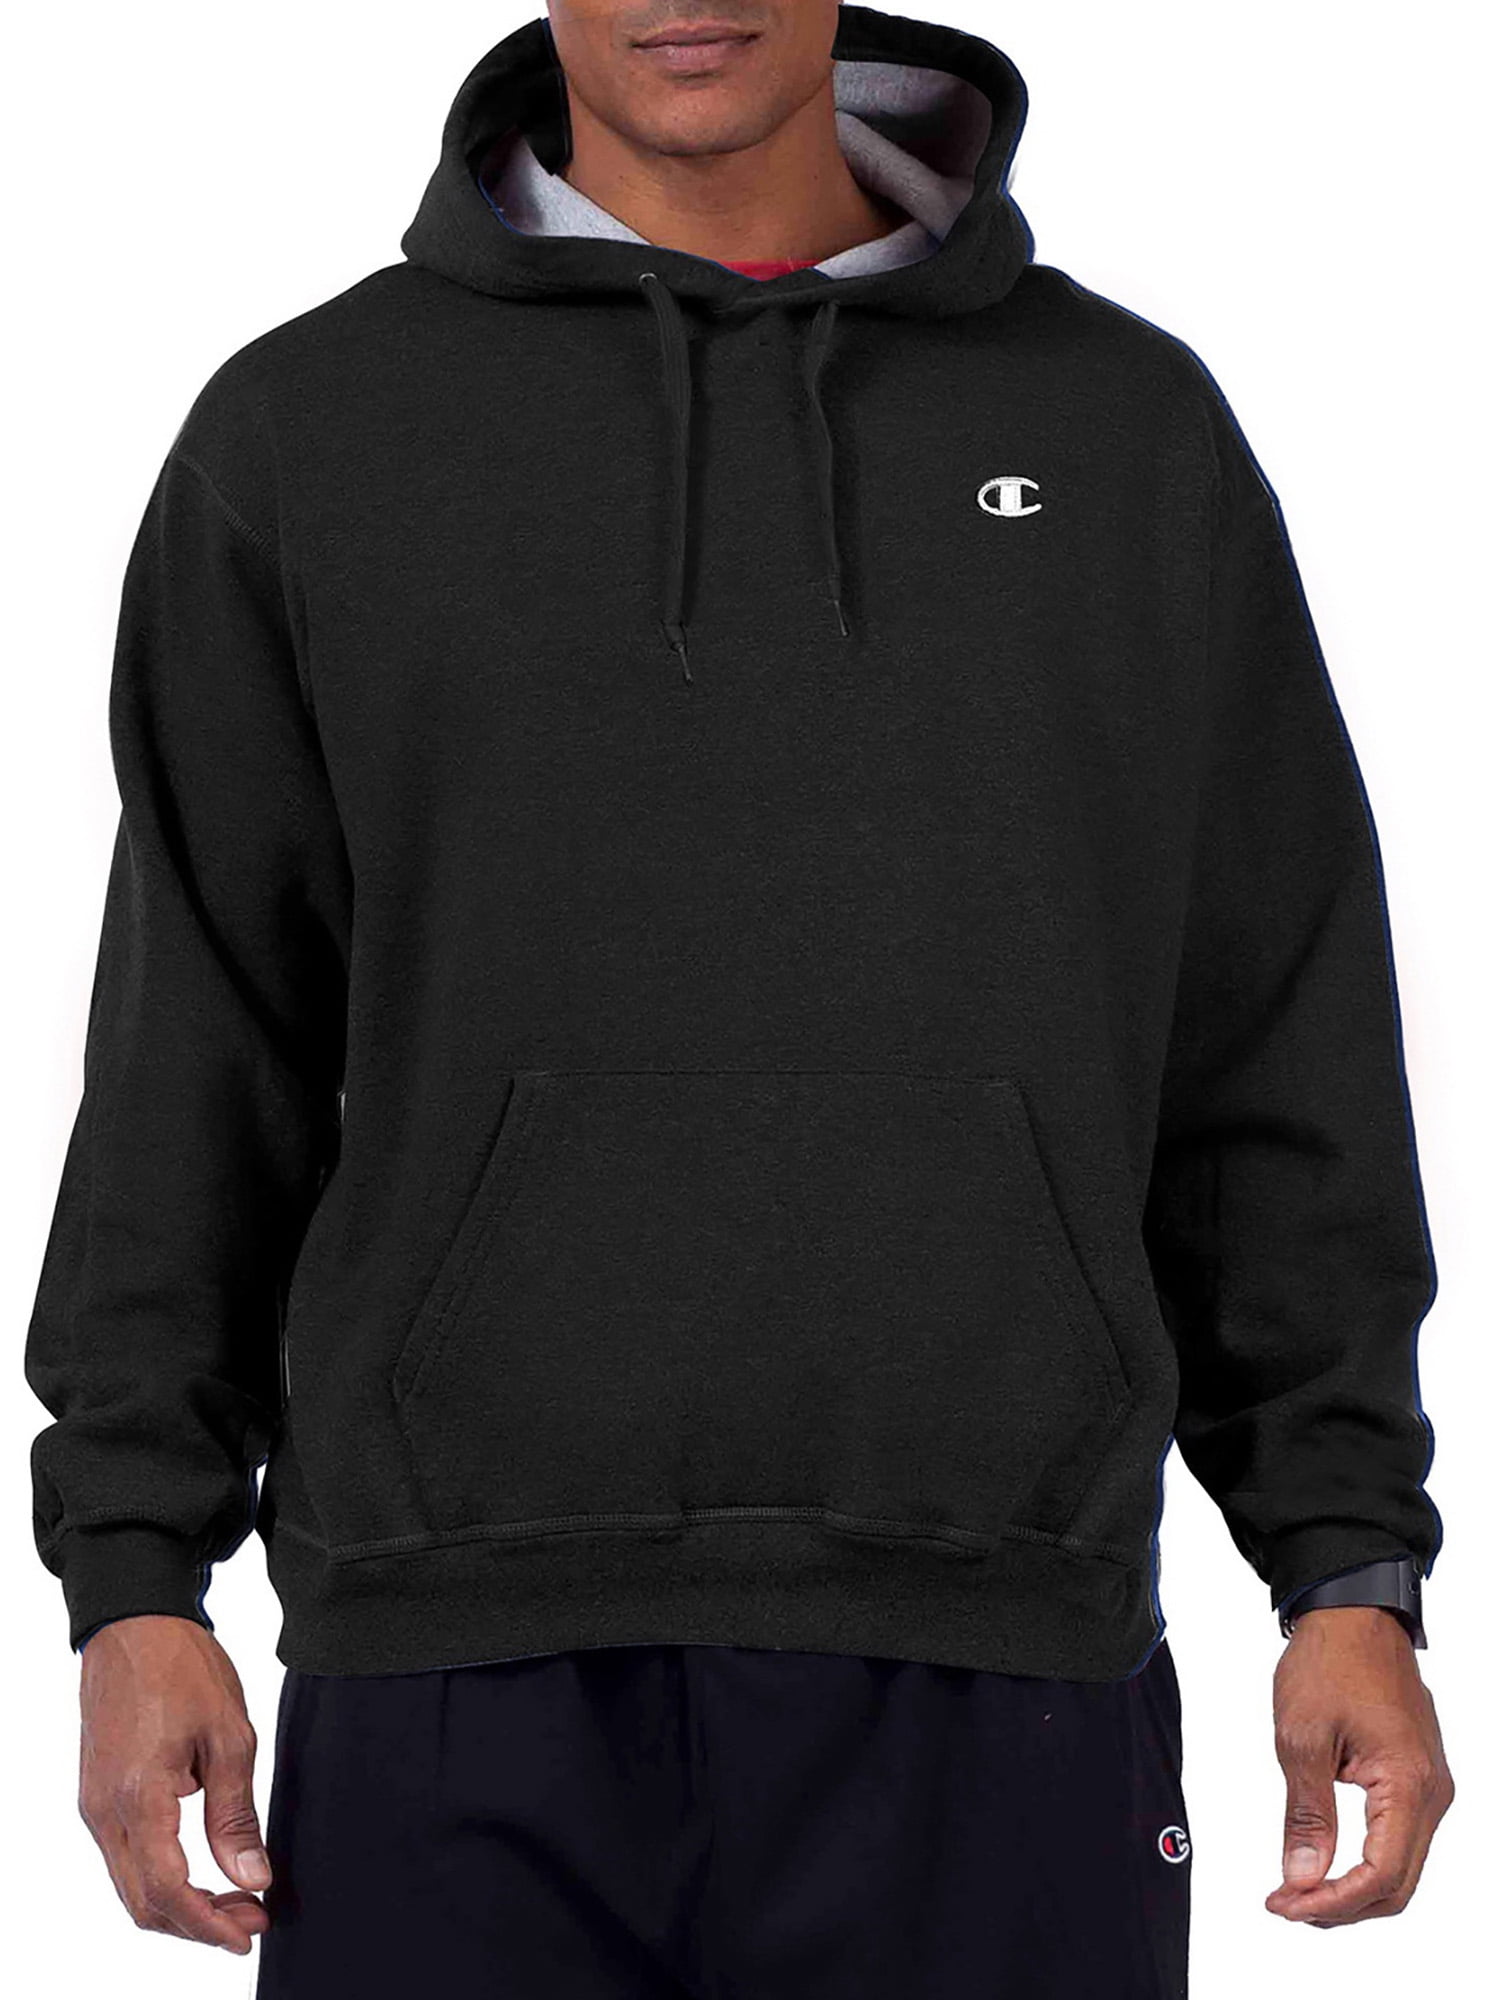 Champion Big and Tall Mens Color Block Full Zip Hoodie with Embroidered Logo